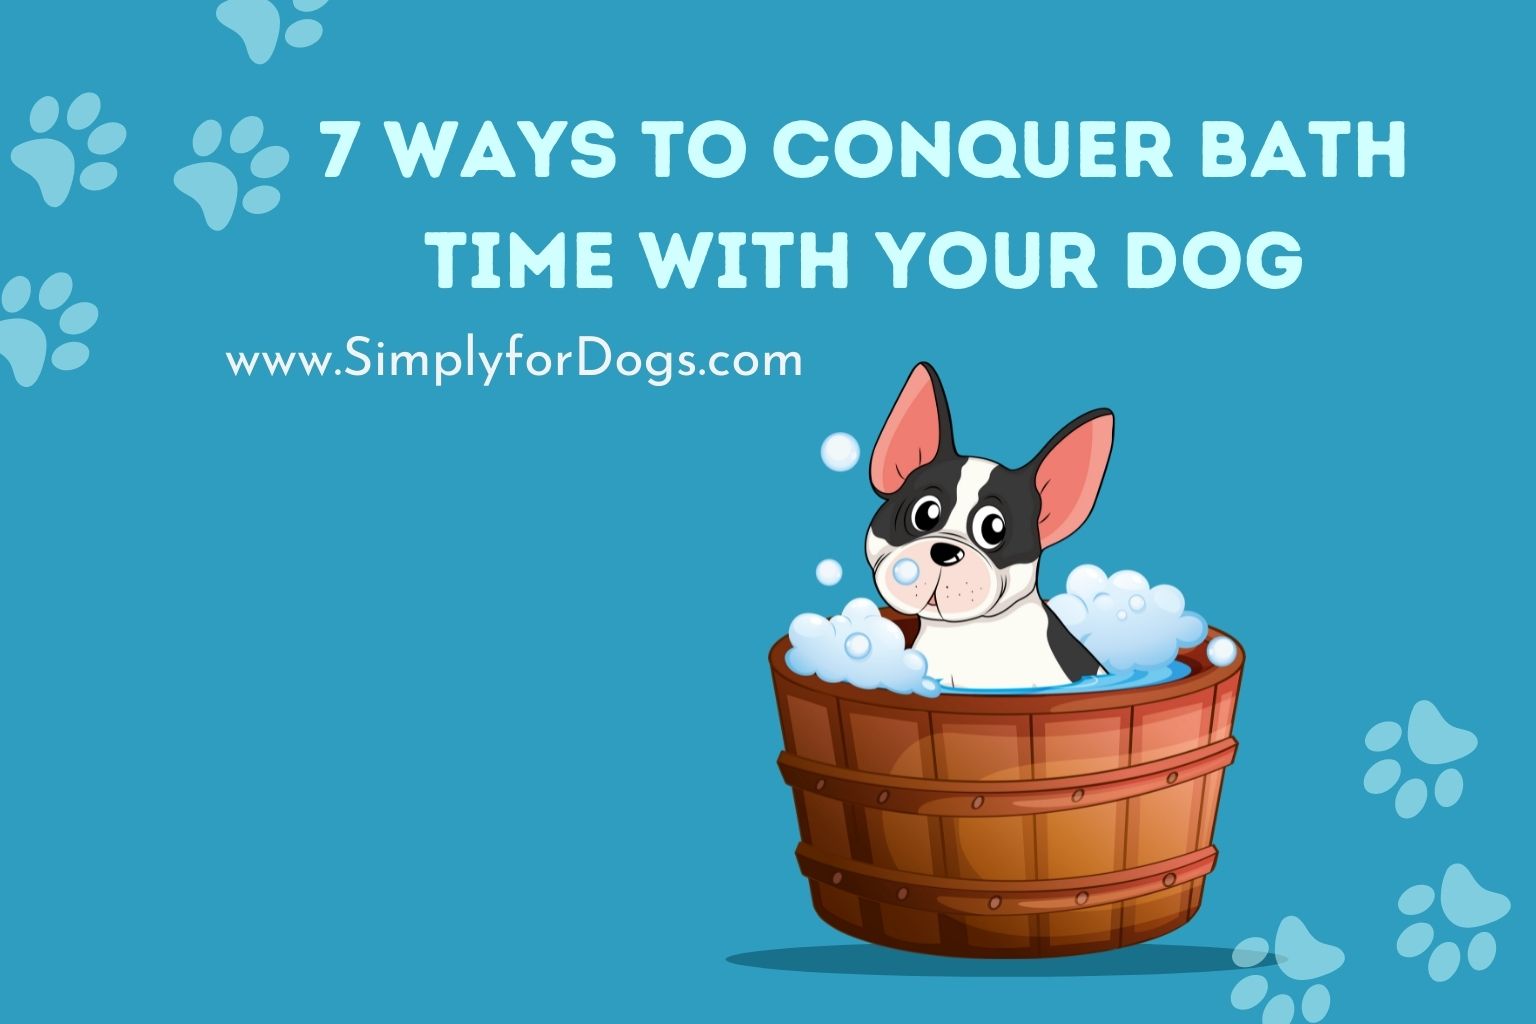 7 Ways to Conquer Bath Time with Your Dog